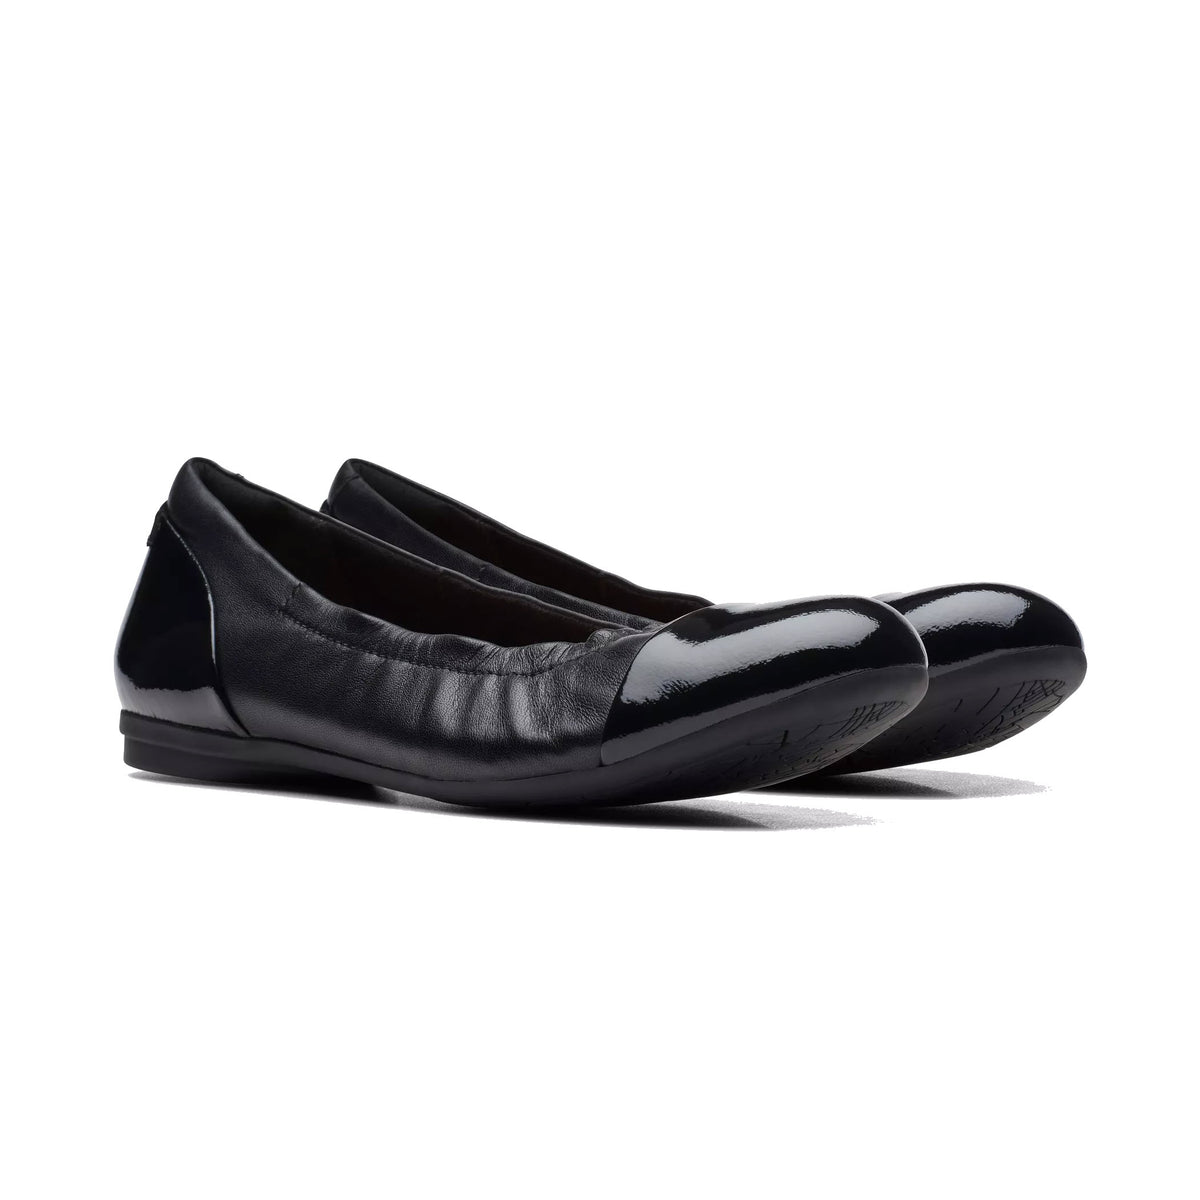 A pair of Clarks Rena Jazz black women&#39;s ballet flats with shiny patent leather toe caps and a Contour Cushion footbed, displayed against a white background.